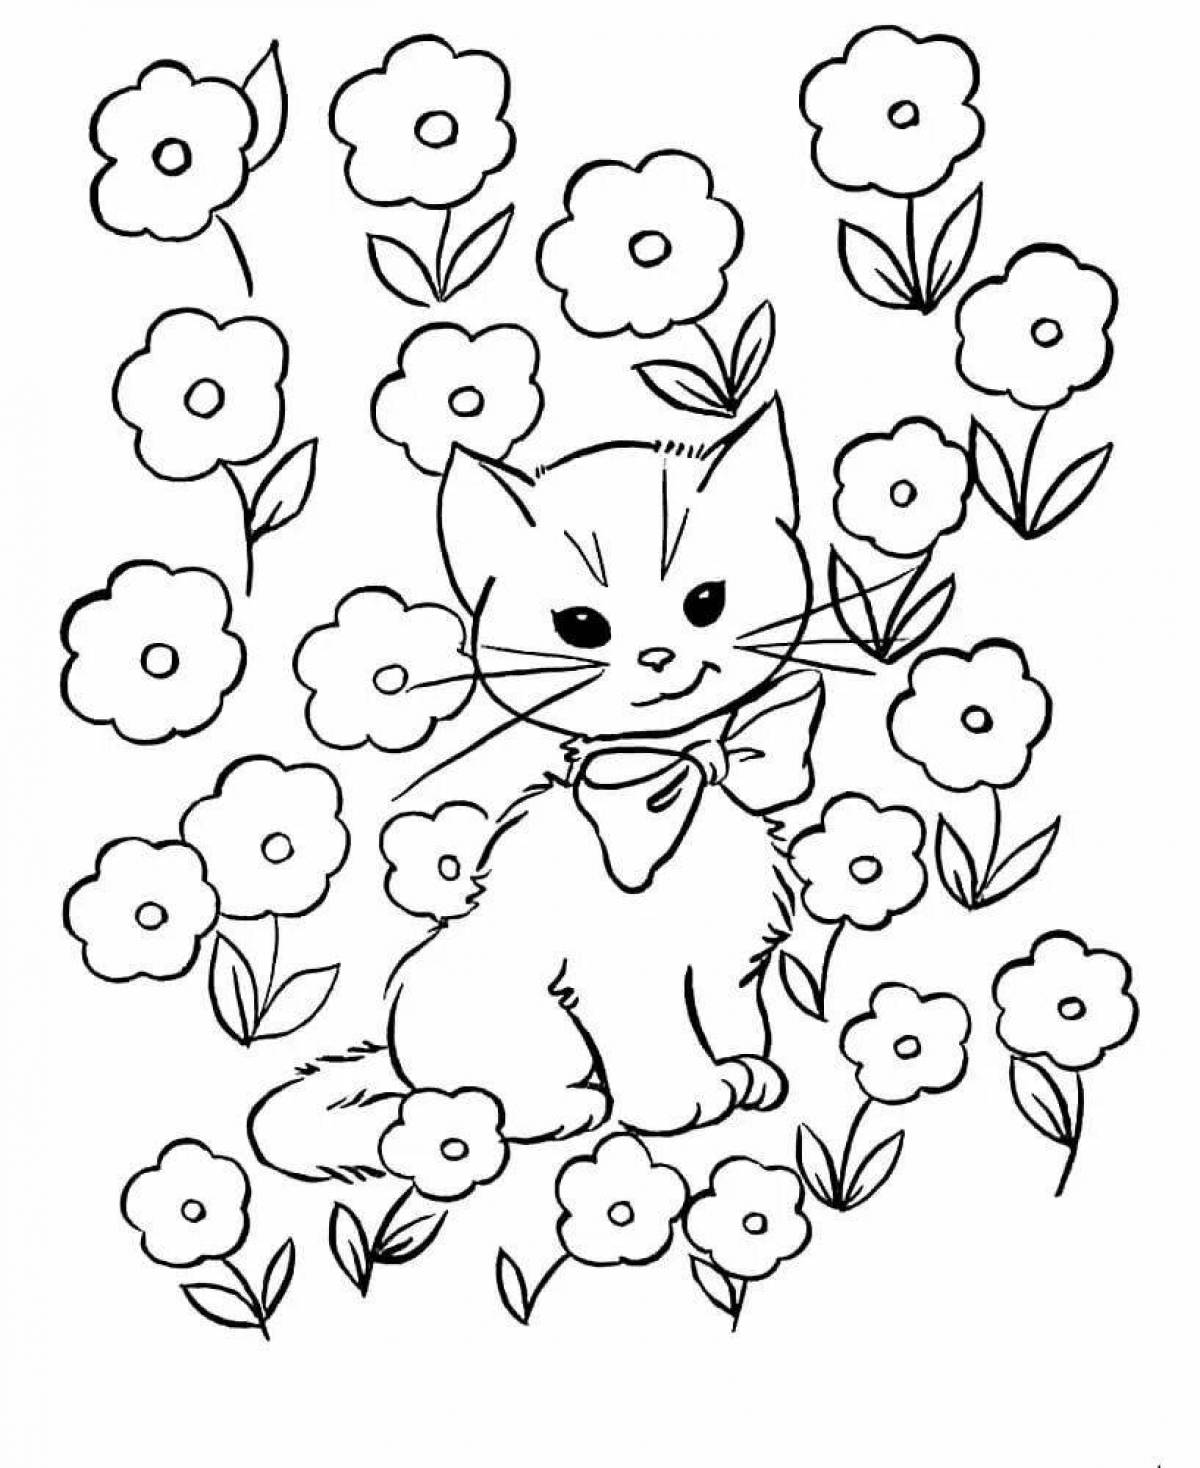 Joyful coloring cat for children 5-6 years old